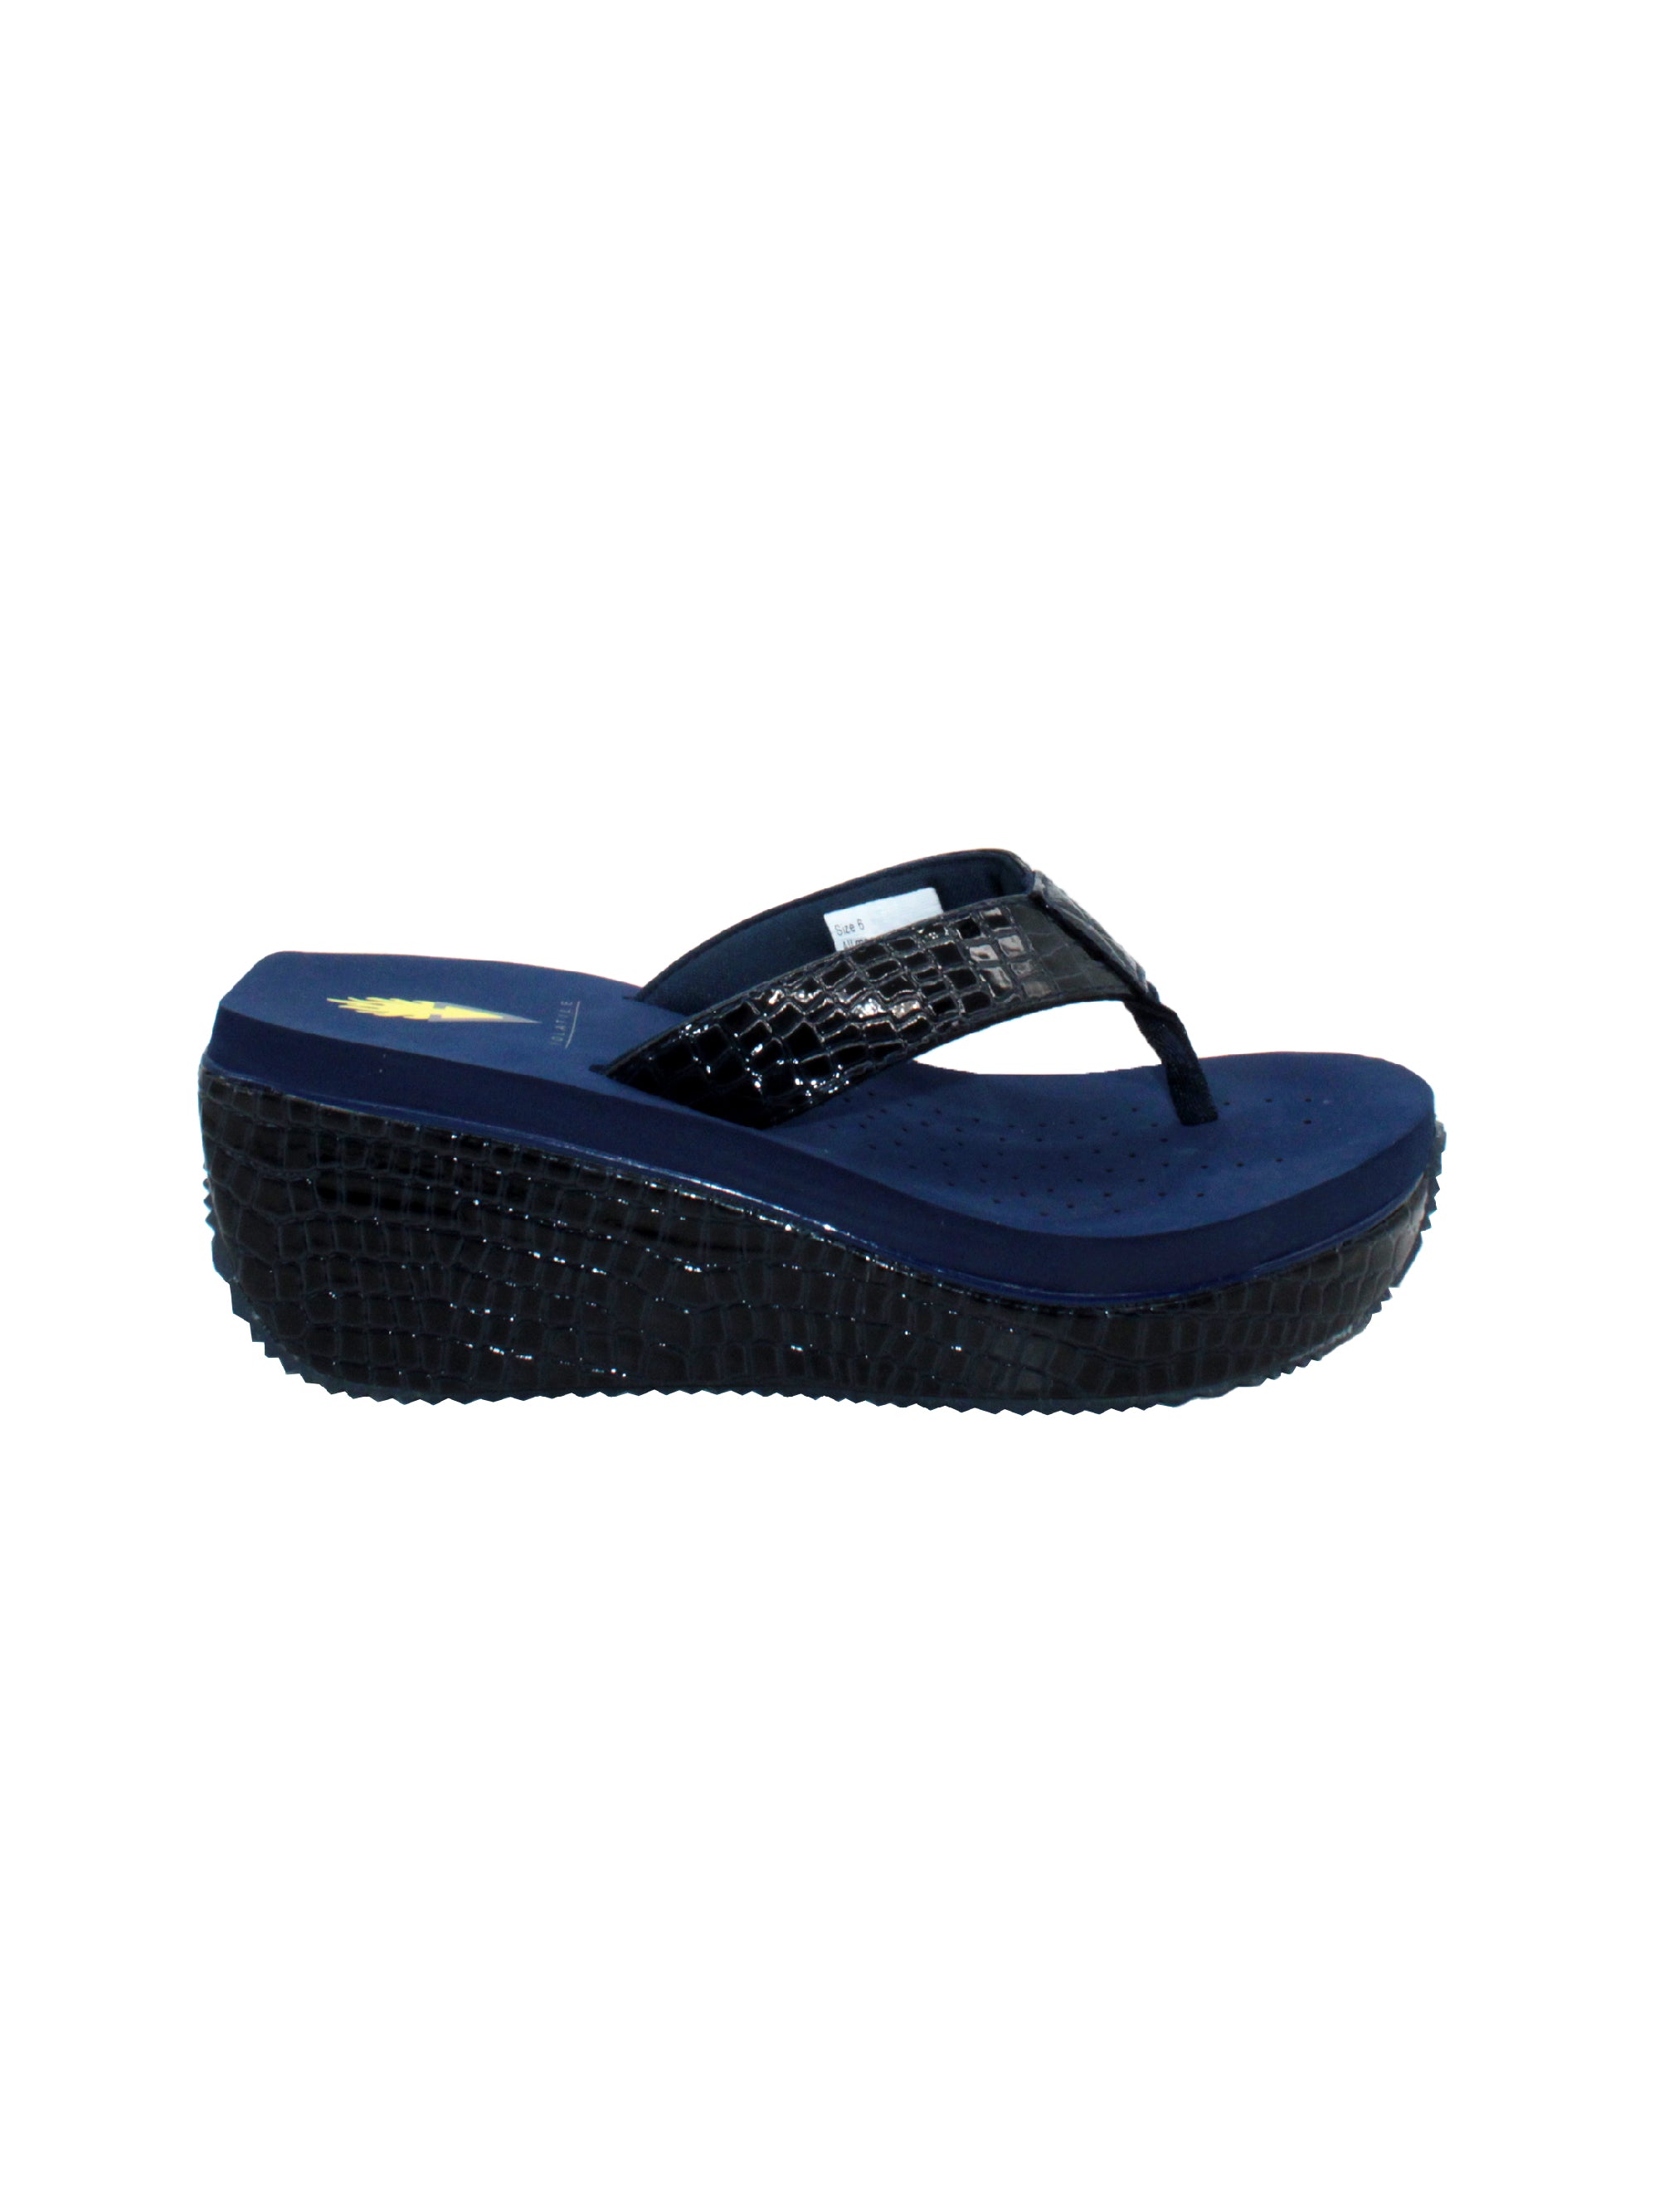 Buy DOCTOR EXTRA SOFT Women's Navy Ortho Sandals Orthopaedic Diabetic Daily  Use Dr Sole Footwear Casual Office Wear Stylish Fashion Comfort Slip on  Chappals Slippers for Ladies & Girl's ART 2122 Online